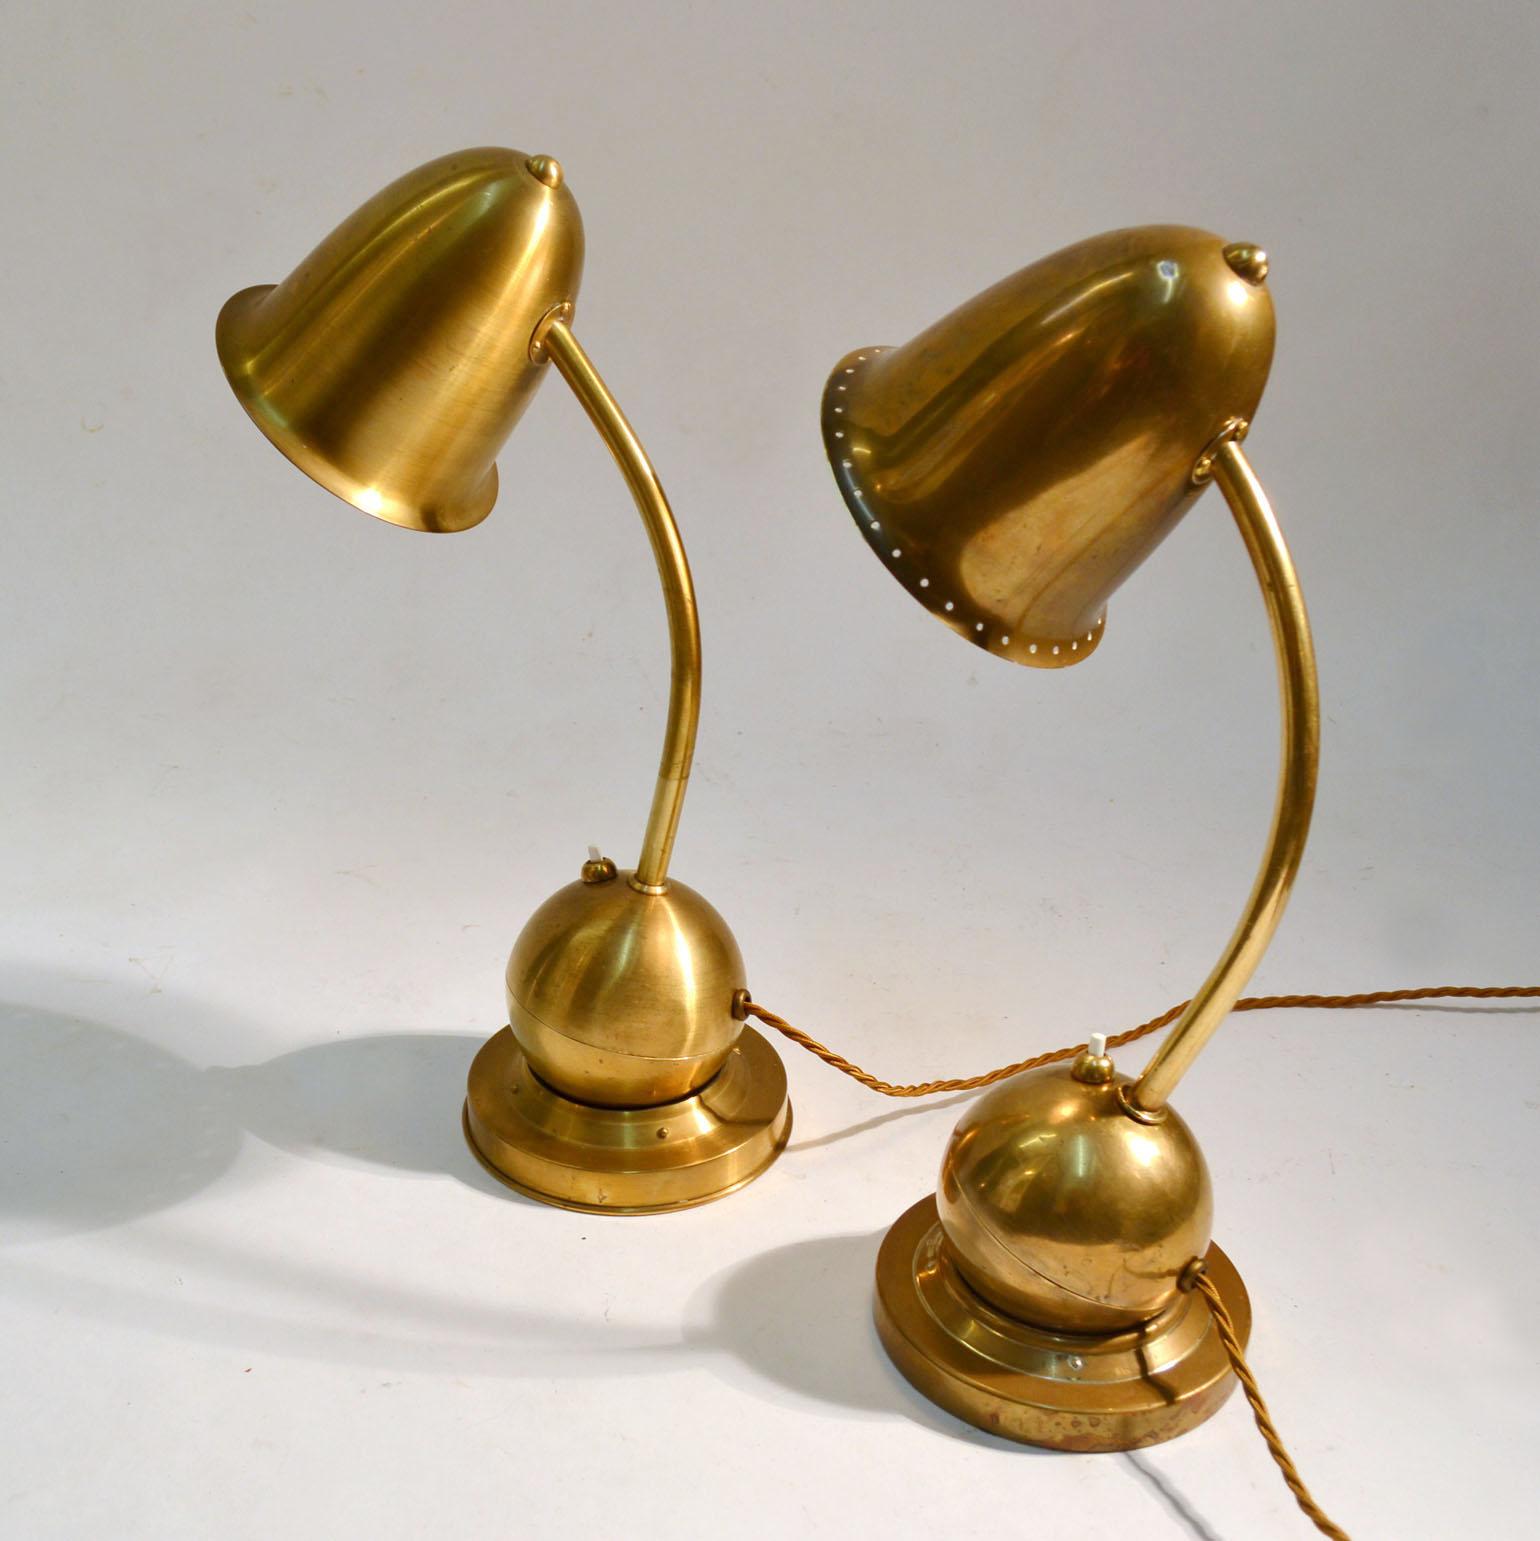 Pair of Modernist Brass Table / Desk Lamps 1930s Lamps by Daalderop Netherlands 1